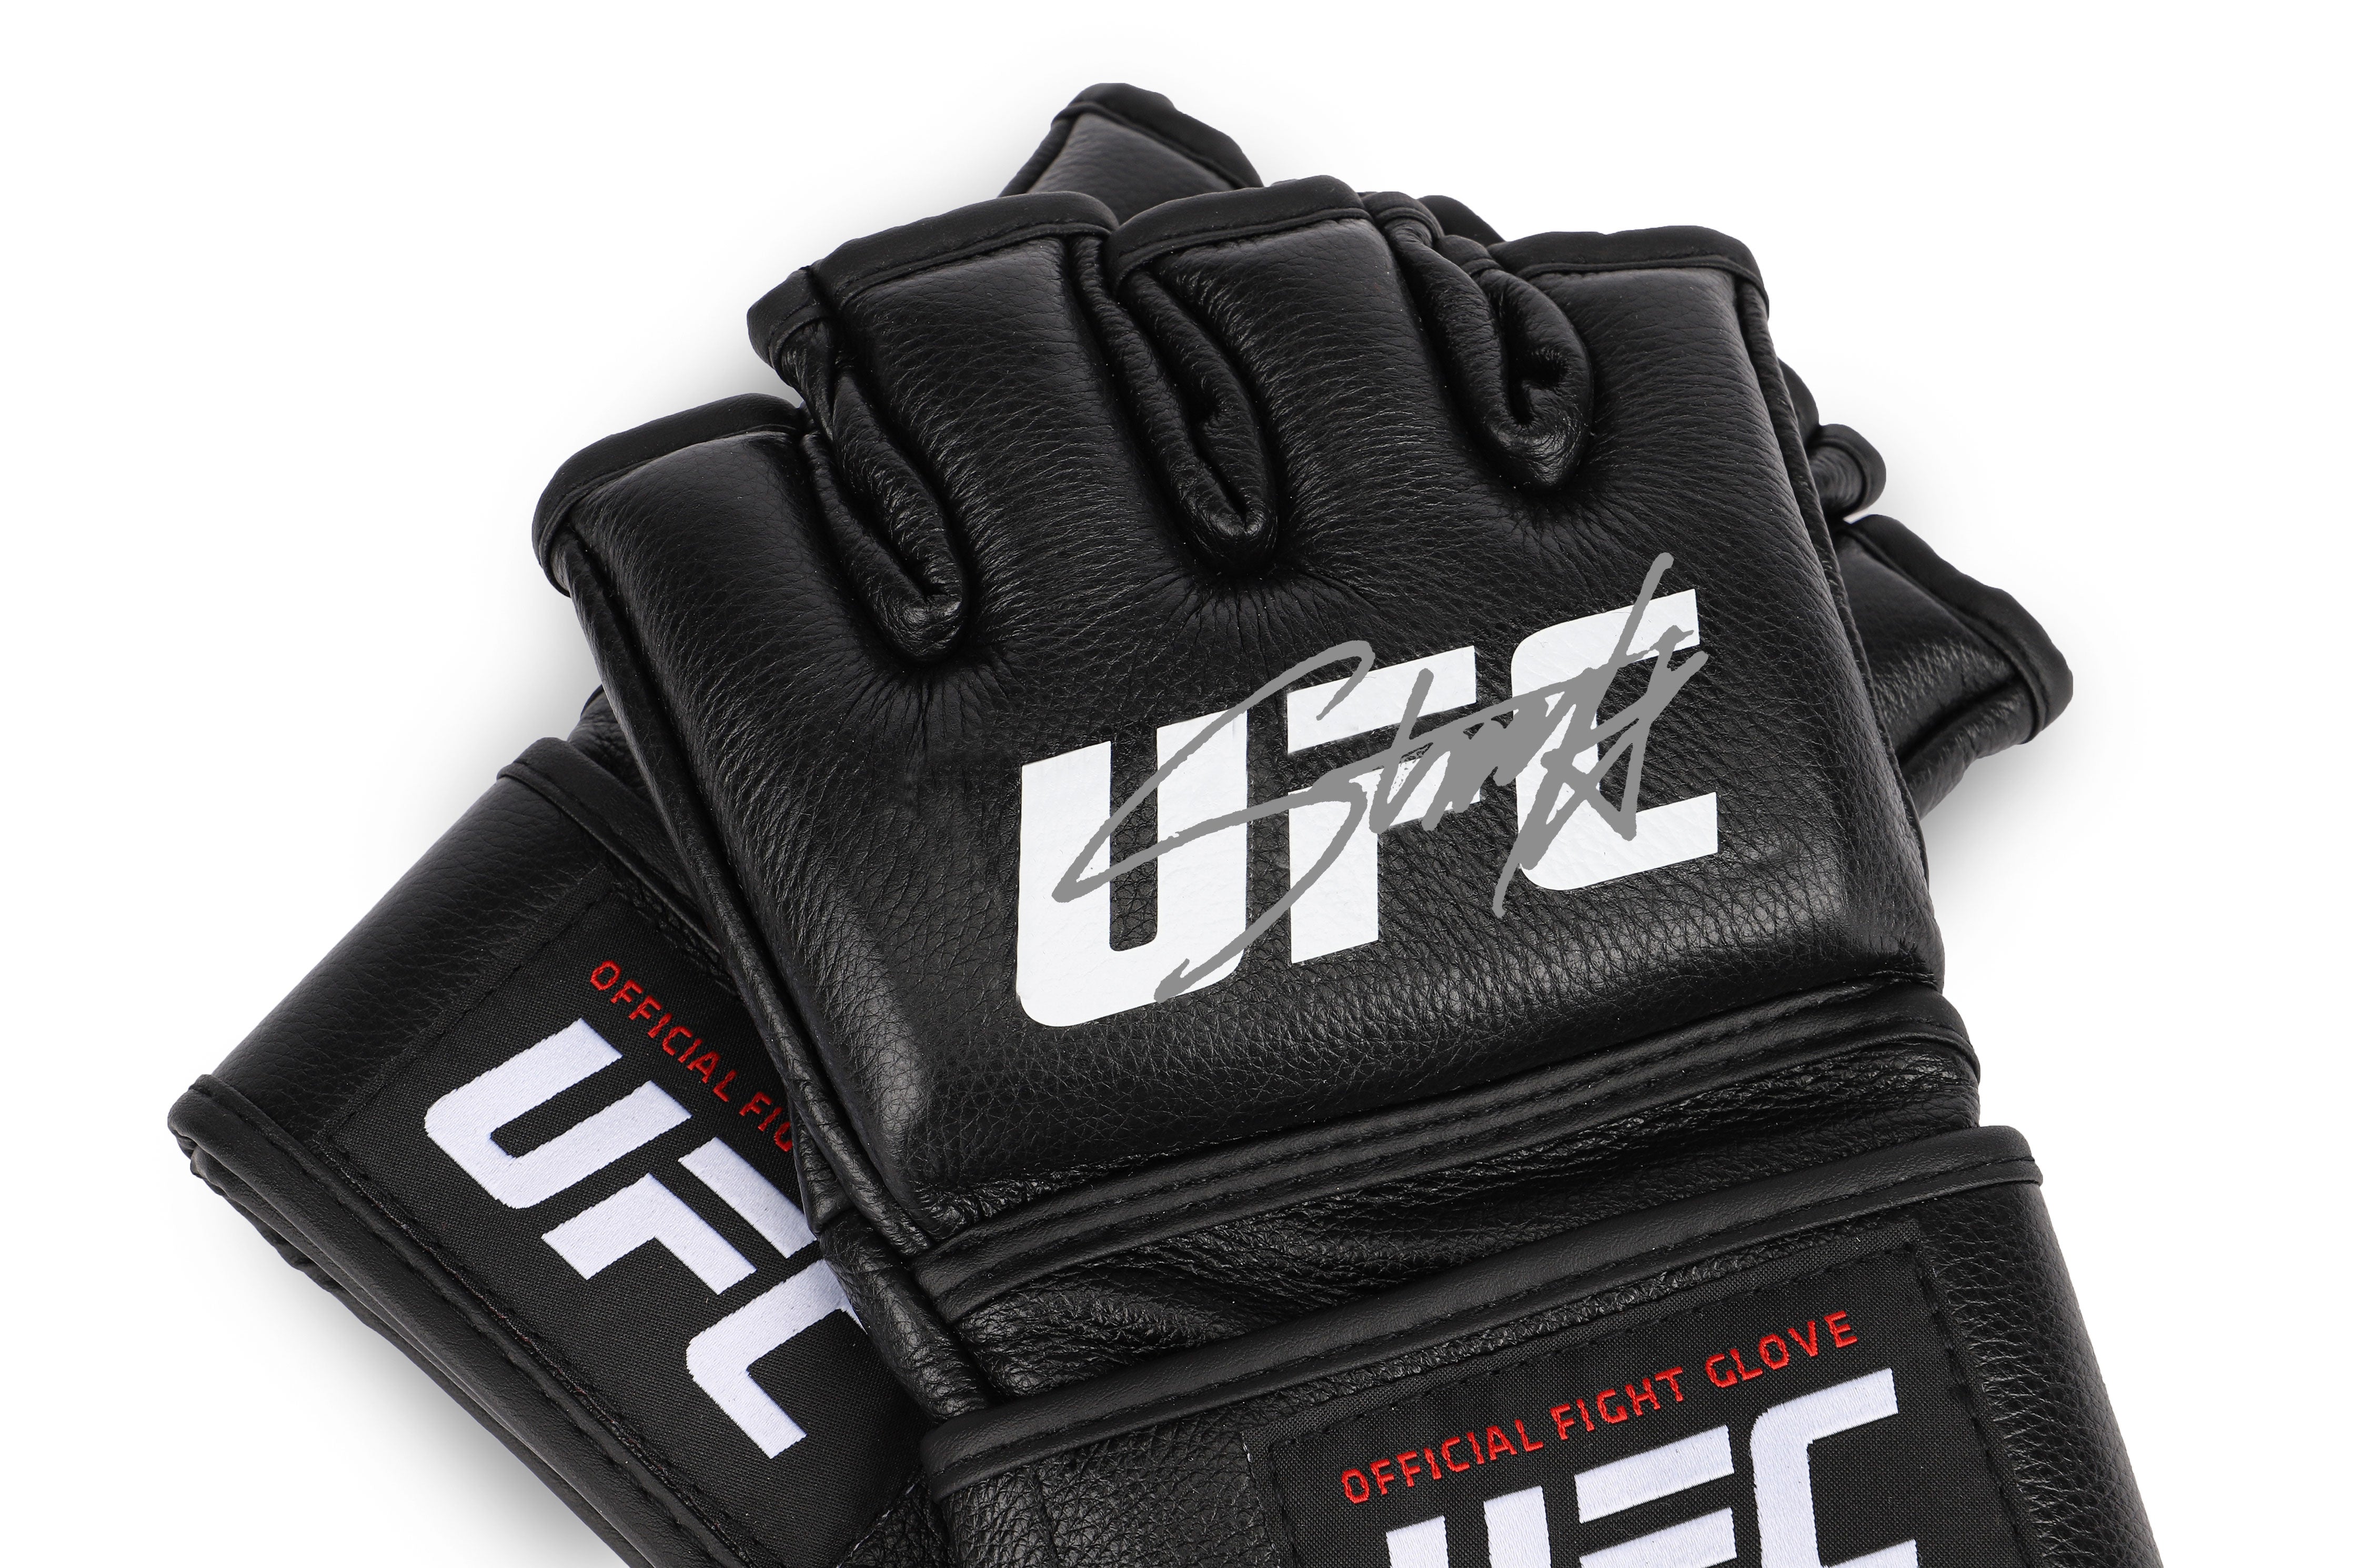 Israel Adesanya Signed Official UFC Replica Gloves